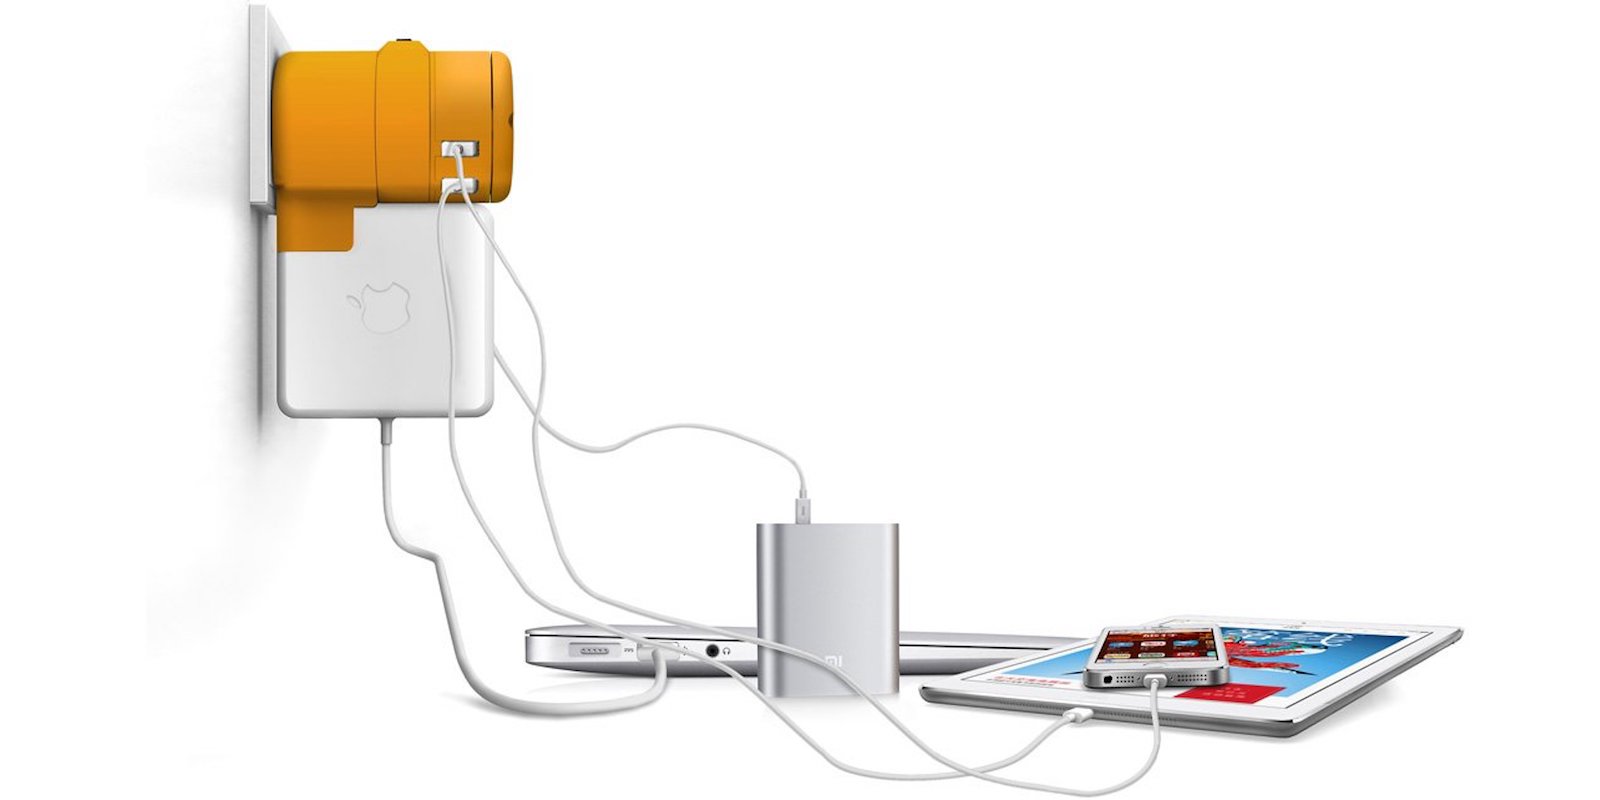 With one compact international charging hub, you can revive up to 5 devices anywhere in the world.